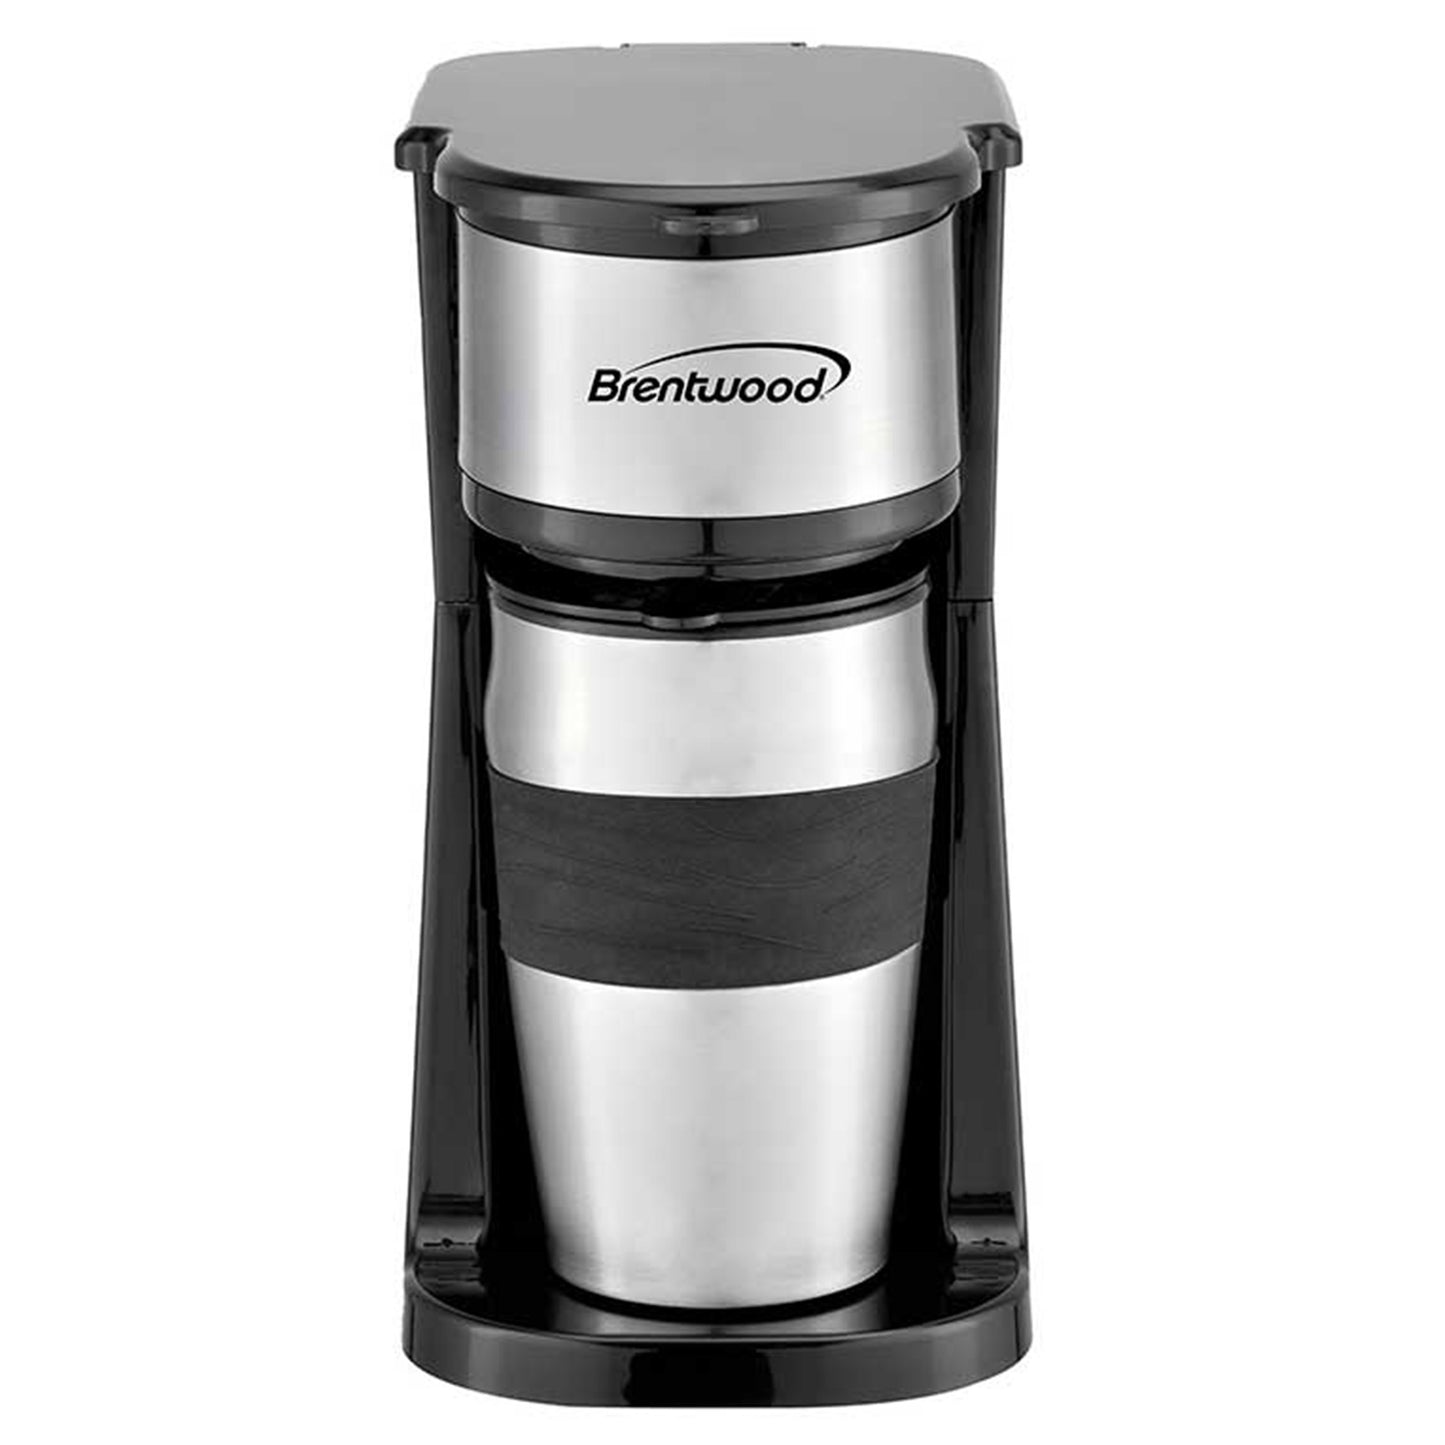 Brentwood Brentwood Portable Single Serve Coffee Maker with 14oz Travel Mug in Black